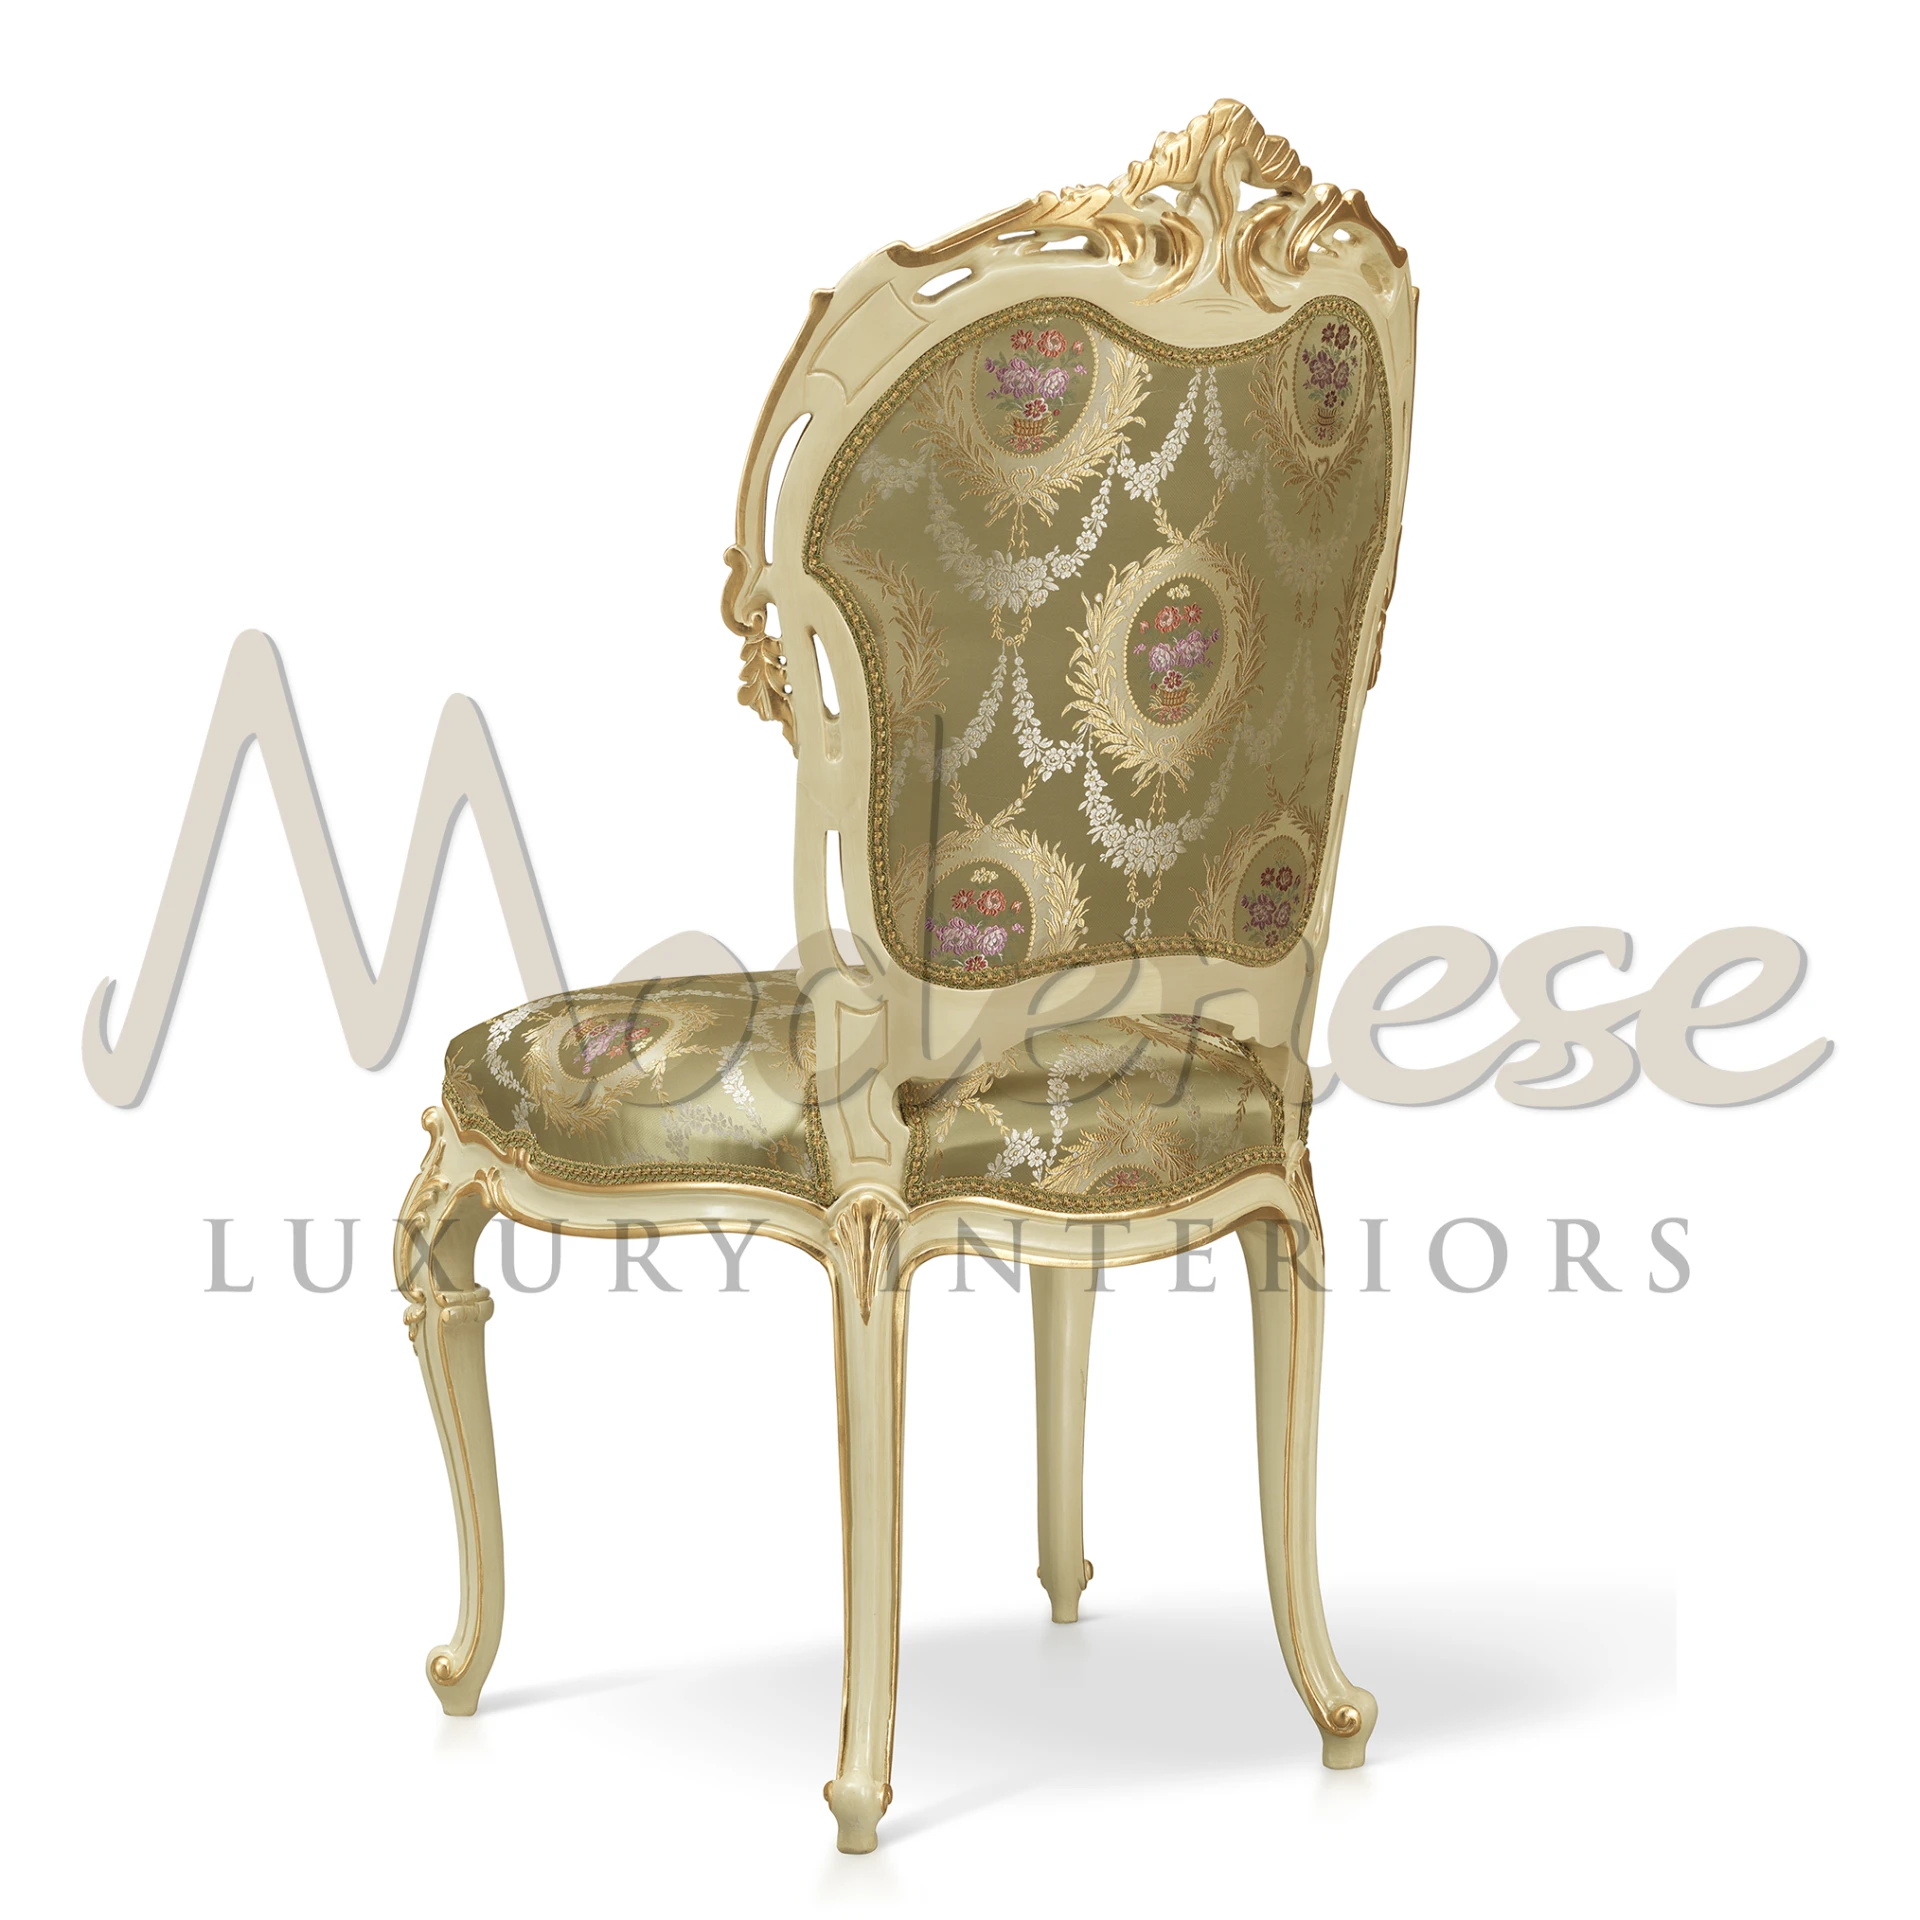 Italian Upholstered chair handcrafted with gold details on olive green fabric.